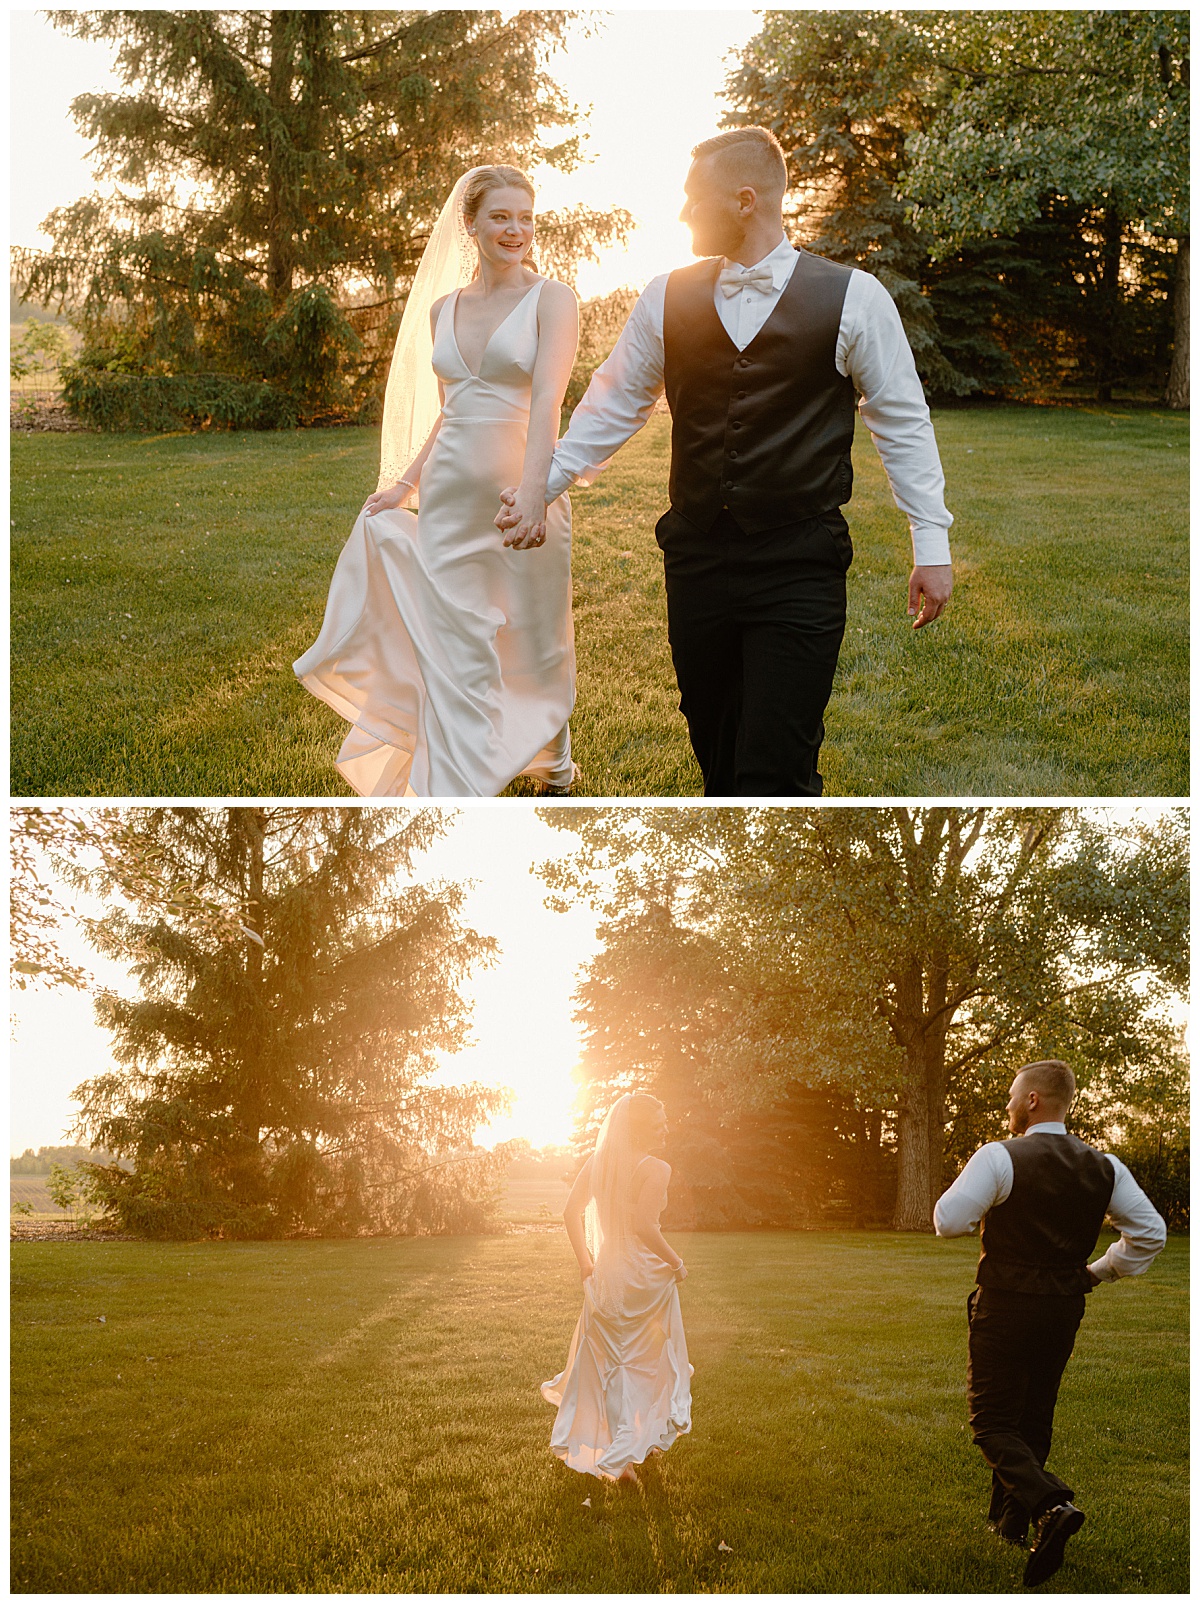 newlyweds hold hands as they run through grass during golden hour by Midwest wedding photographer